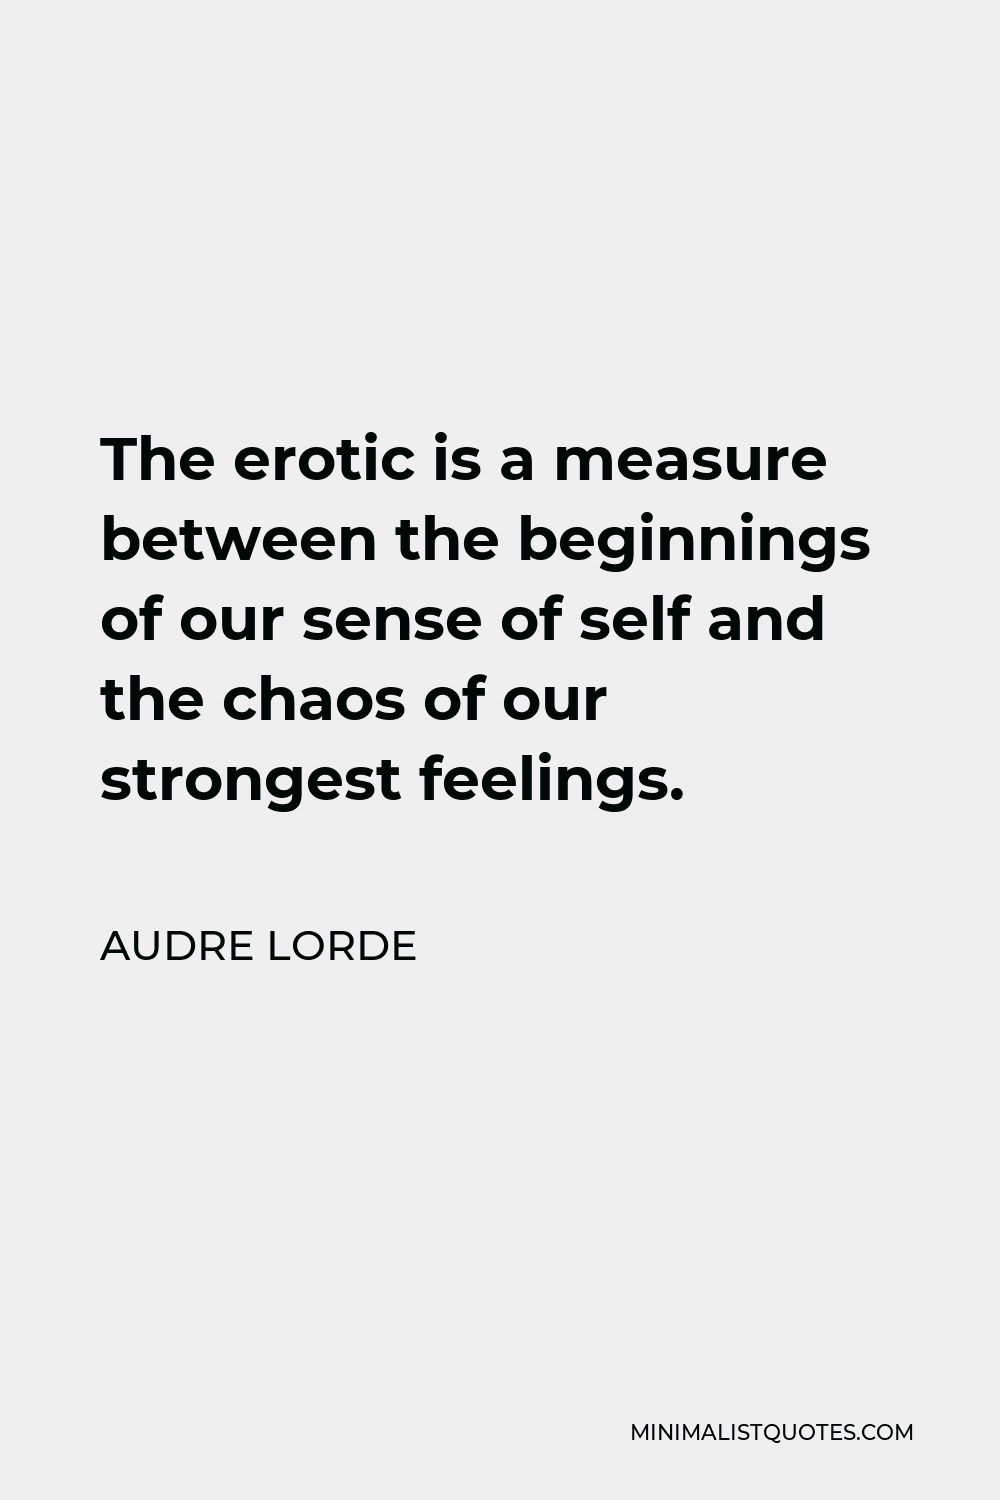 Audre Lorde Quote - The erotic is a measure between the beginnings of our sense of self and the chaos of our strongest feelings.